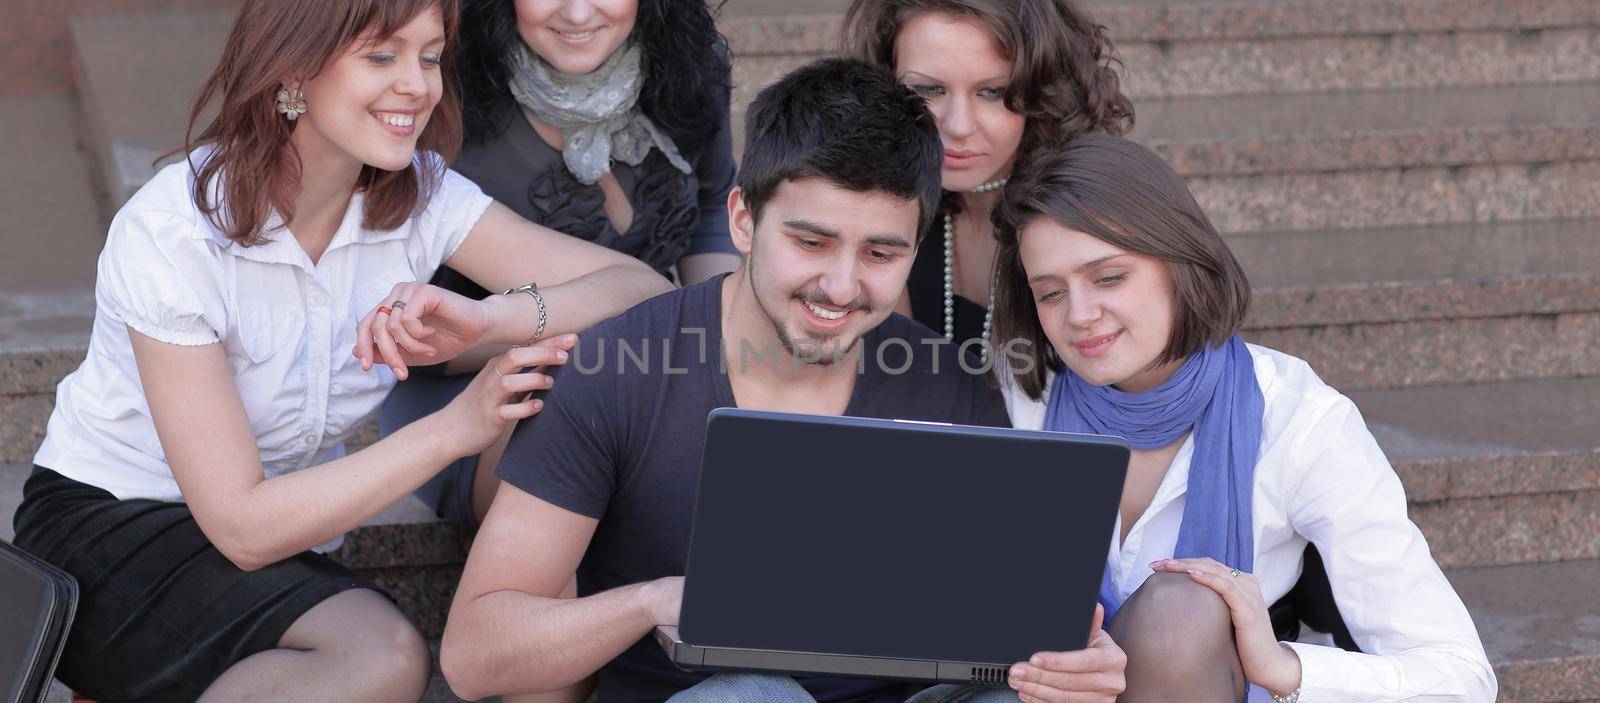 friends of the students looking at the laptop screen by SmartPhotoLab